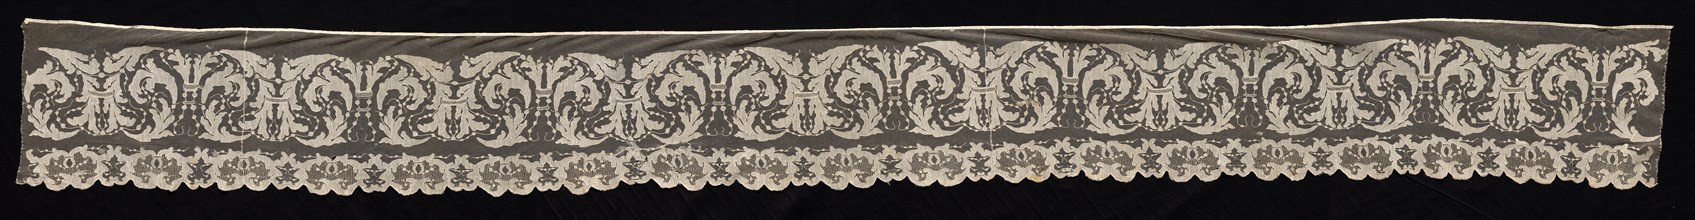 Border with Floral Motifs, 19th century. Creator: Unknown.